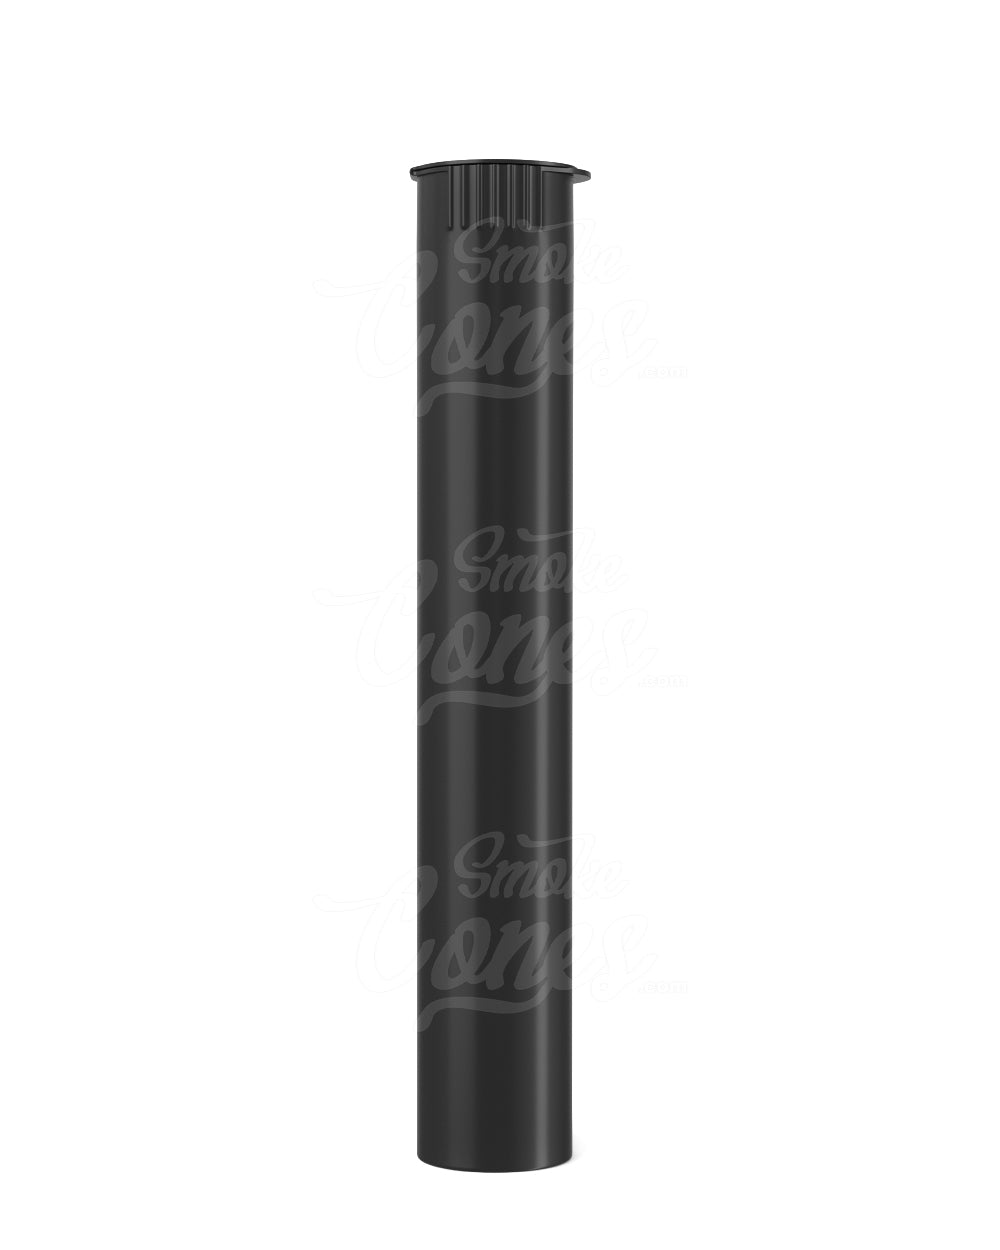 116mm Tech-line Pre-Roll Tube - Black - Child Resistant Made in